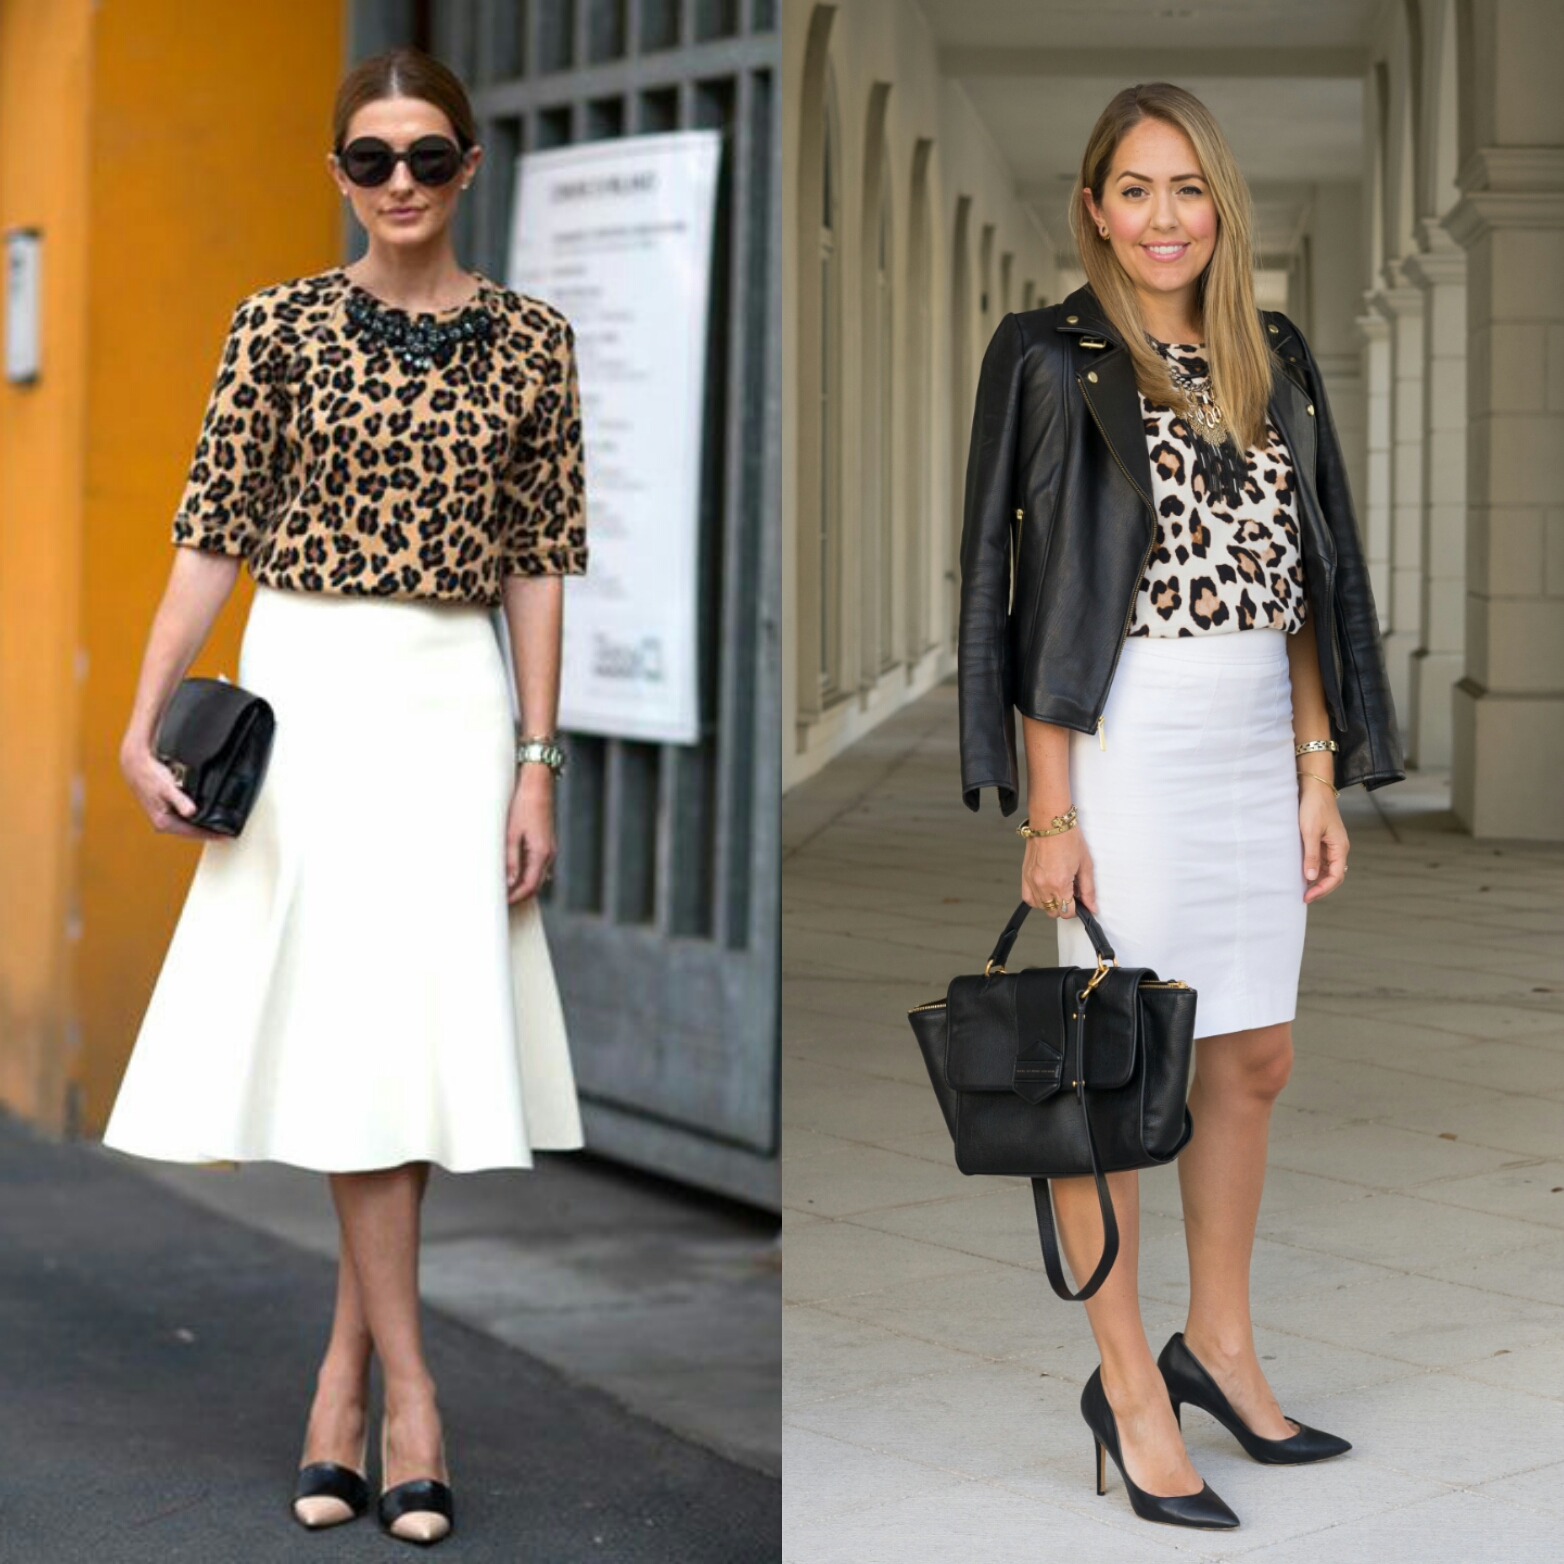 Today's Everyday Fashion: The Leopard Top — J's Everyday Fashion